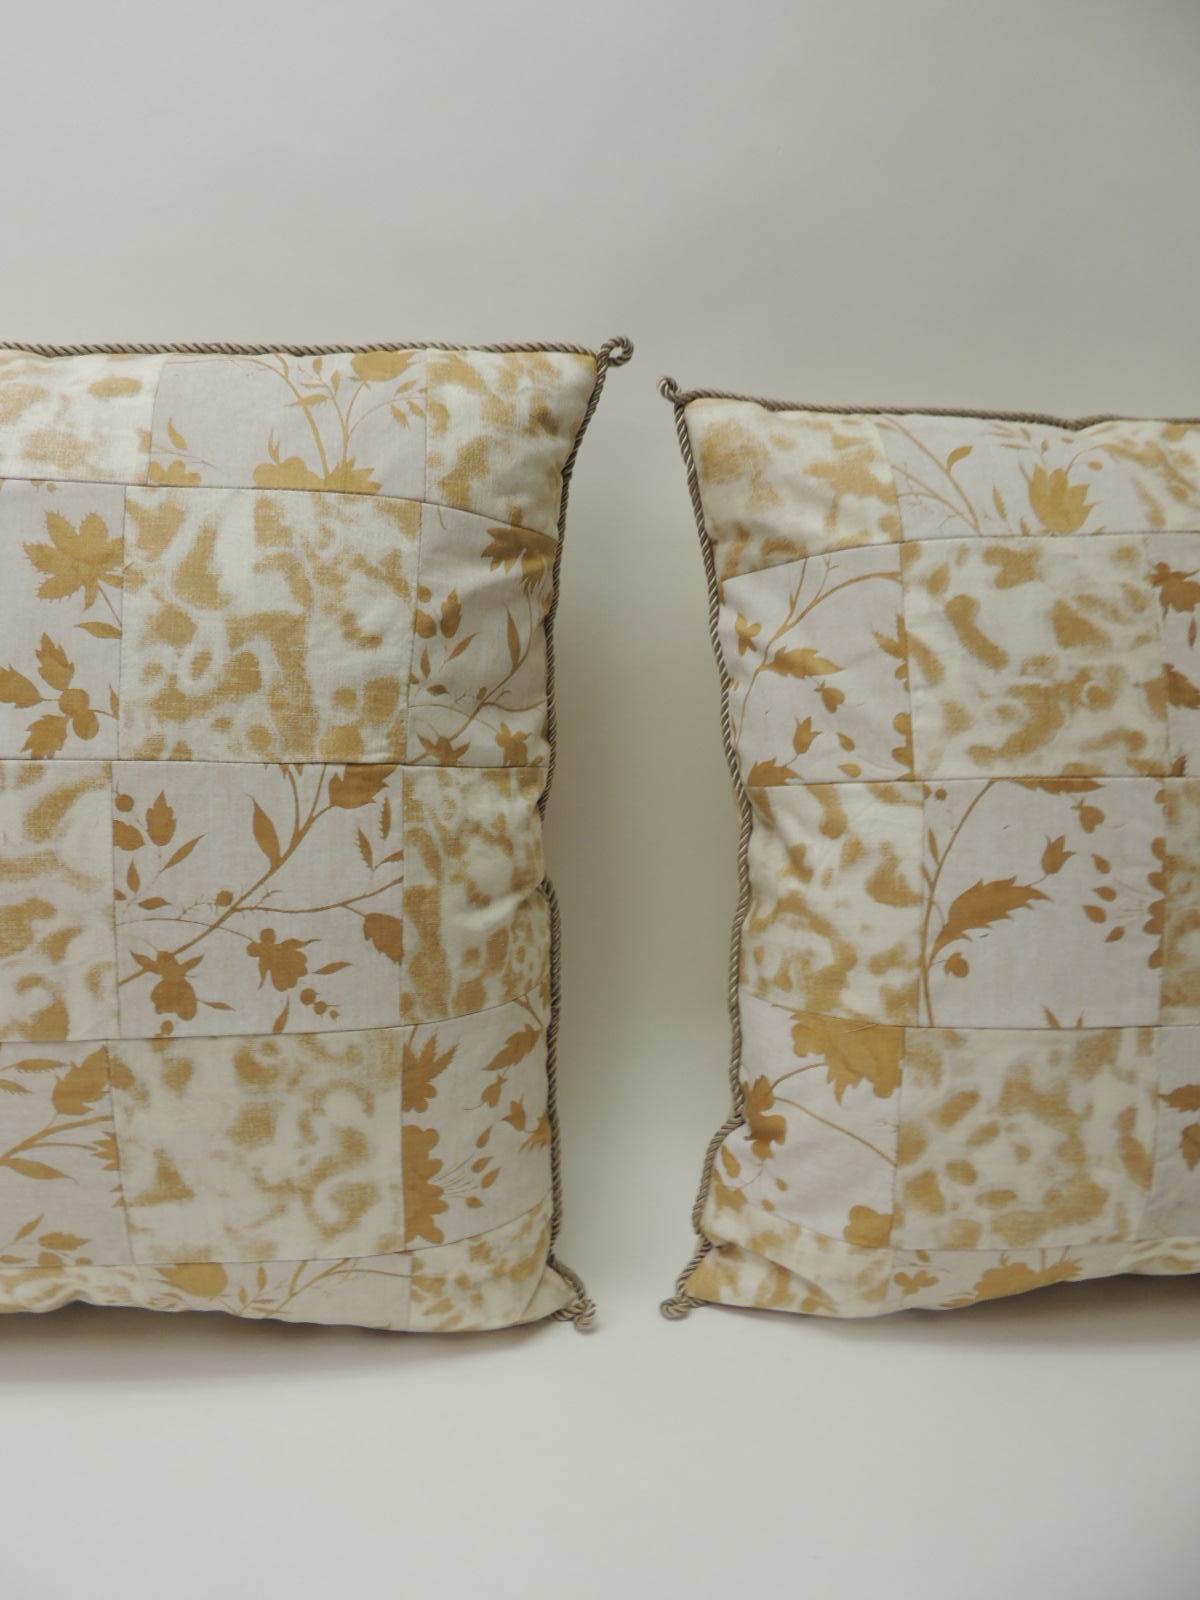 Pair of vintage yellow and natural Fortuny patchwork square decorative handcrafted pillows with ATG custom patchwork design. Decorative pillows embellished with silk grey rope trim all around. Backing of the pillows finished with ecru silk.